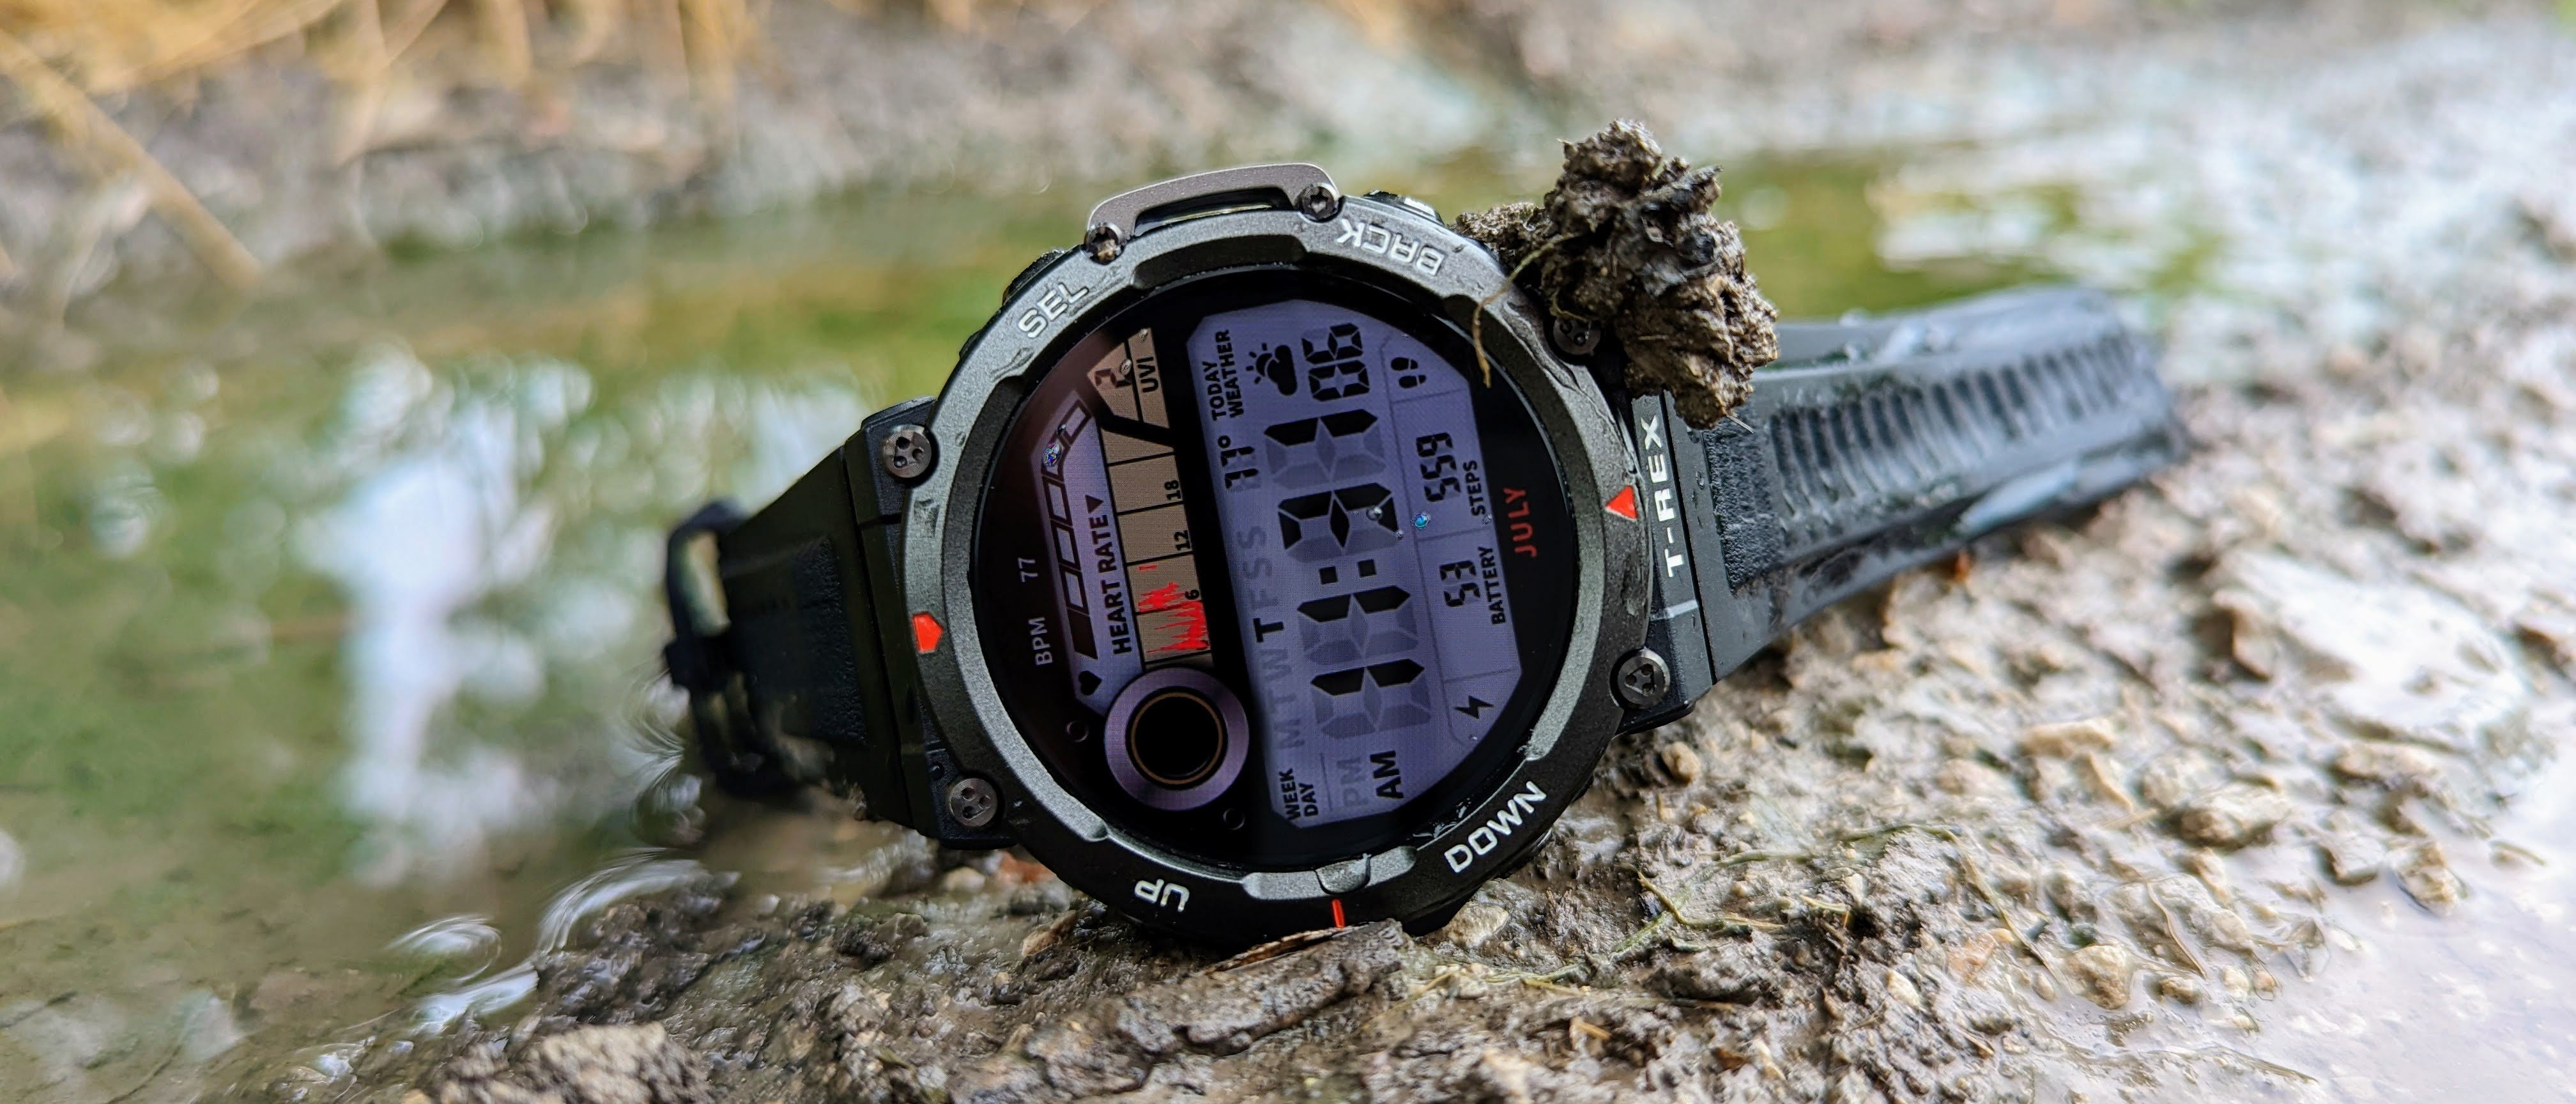 Amazfit T-Rex 2 Review: a fitness smartwatch that will likely